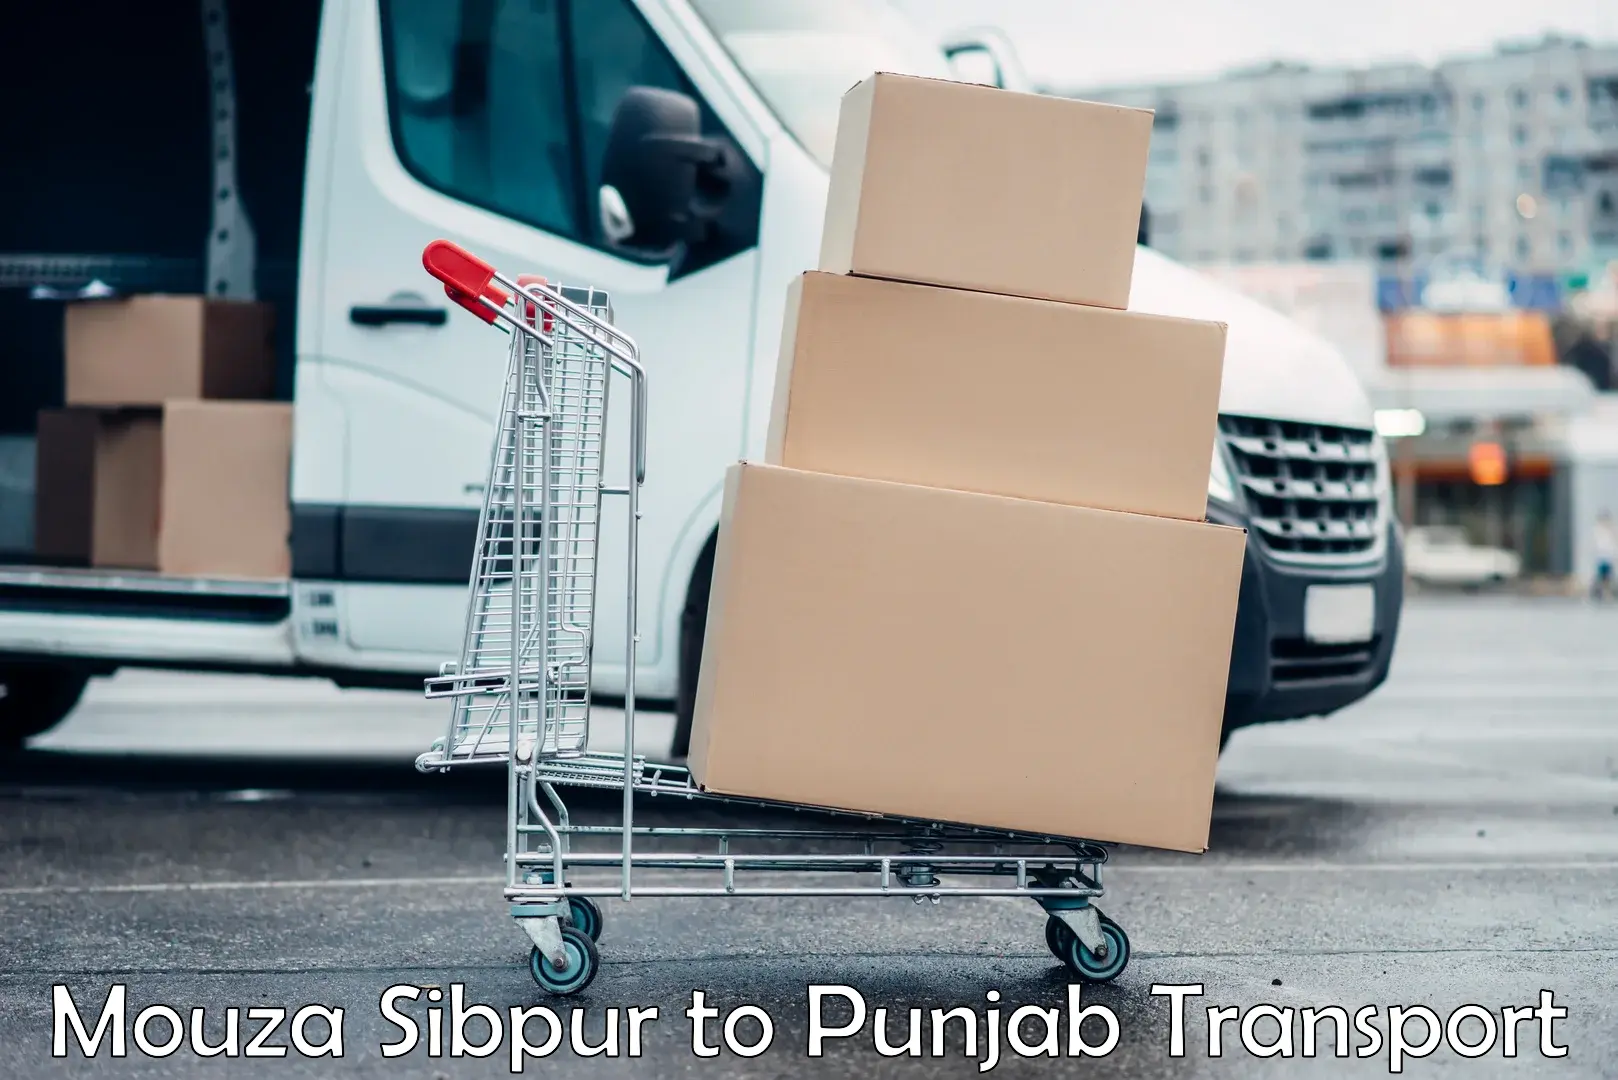 Road transport online services Mouza Sibpur to Malout